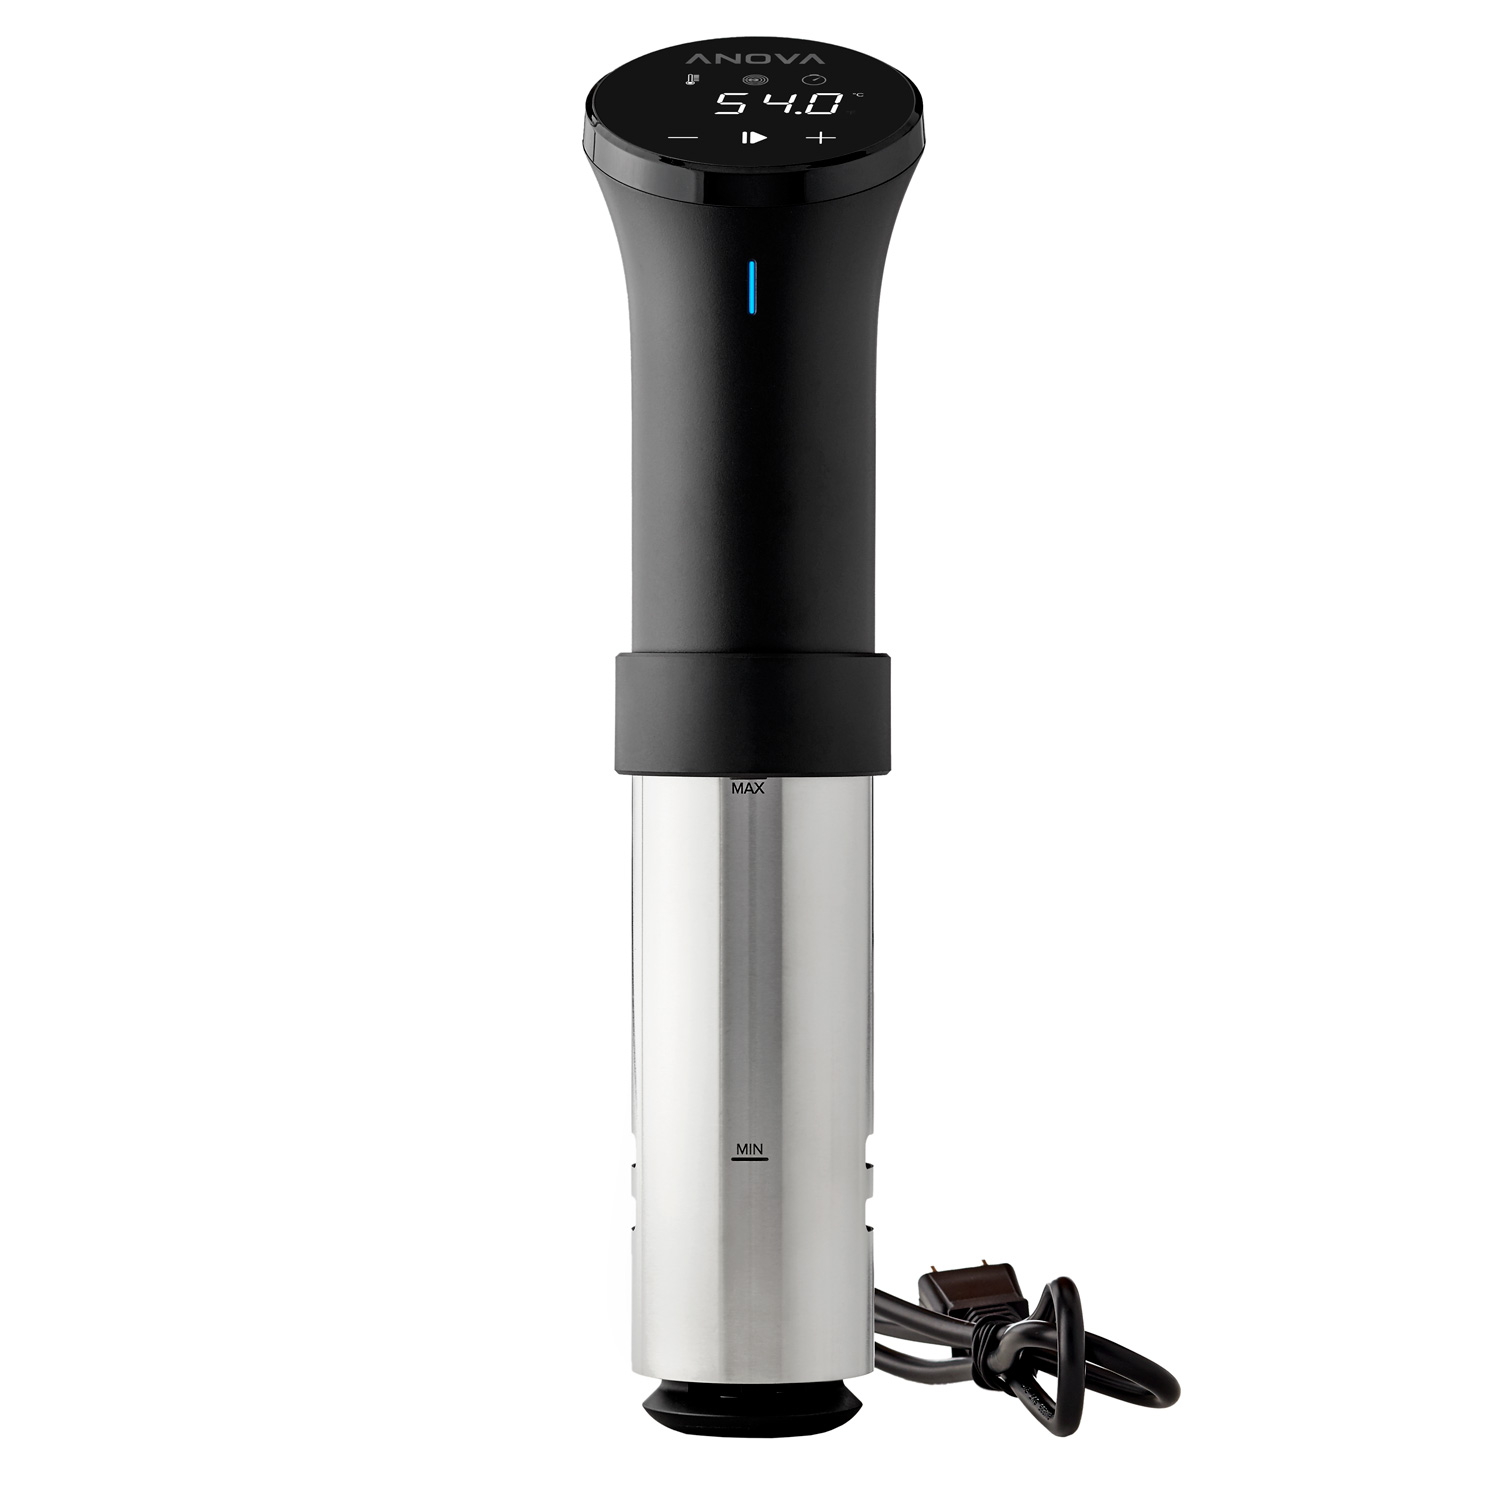 MegaChef Immersion Circulation Precision Stainless Steel Sous-Vide